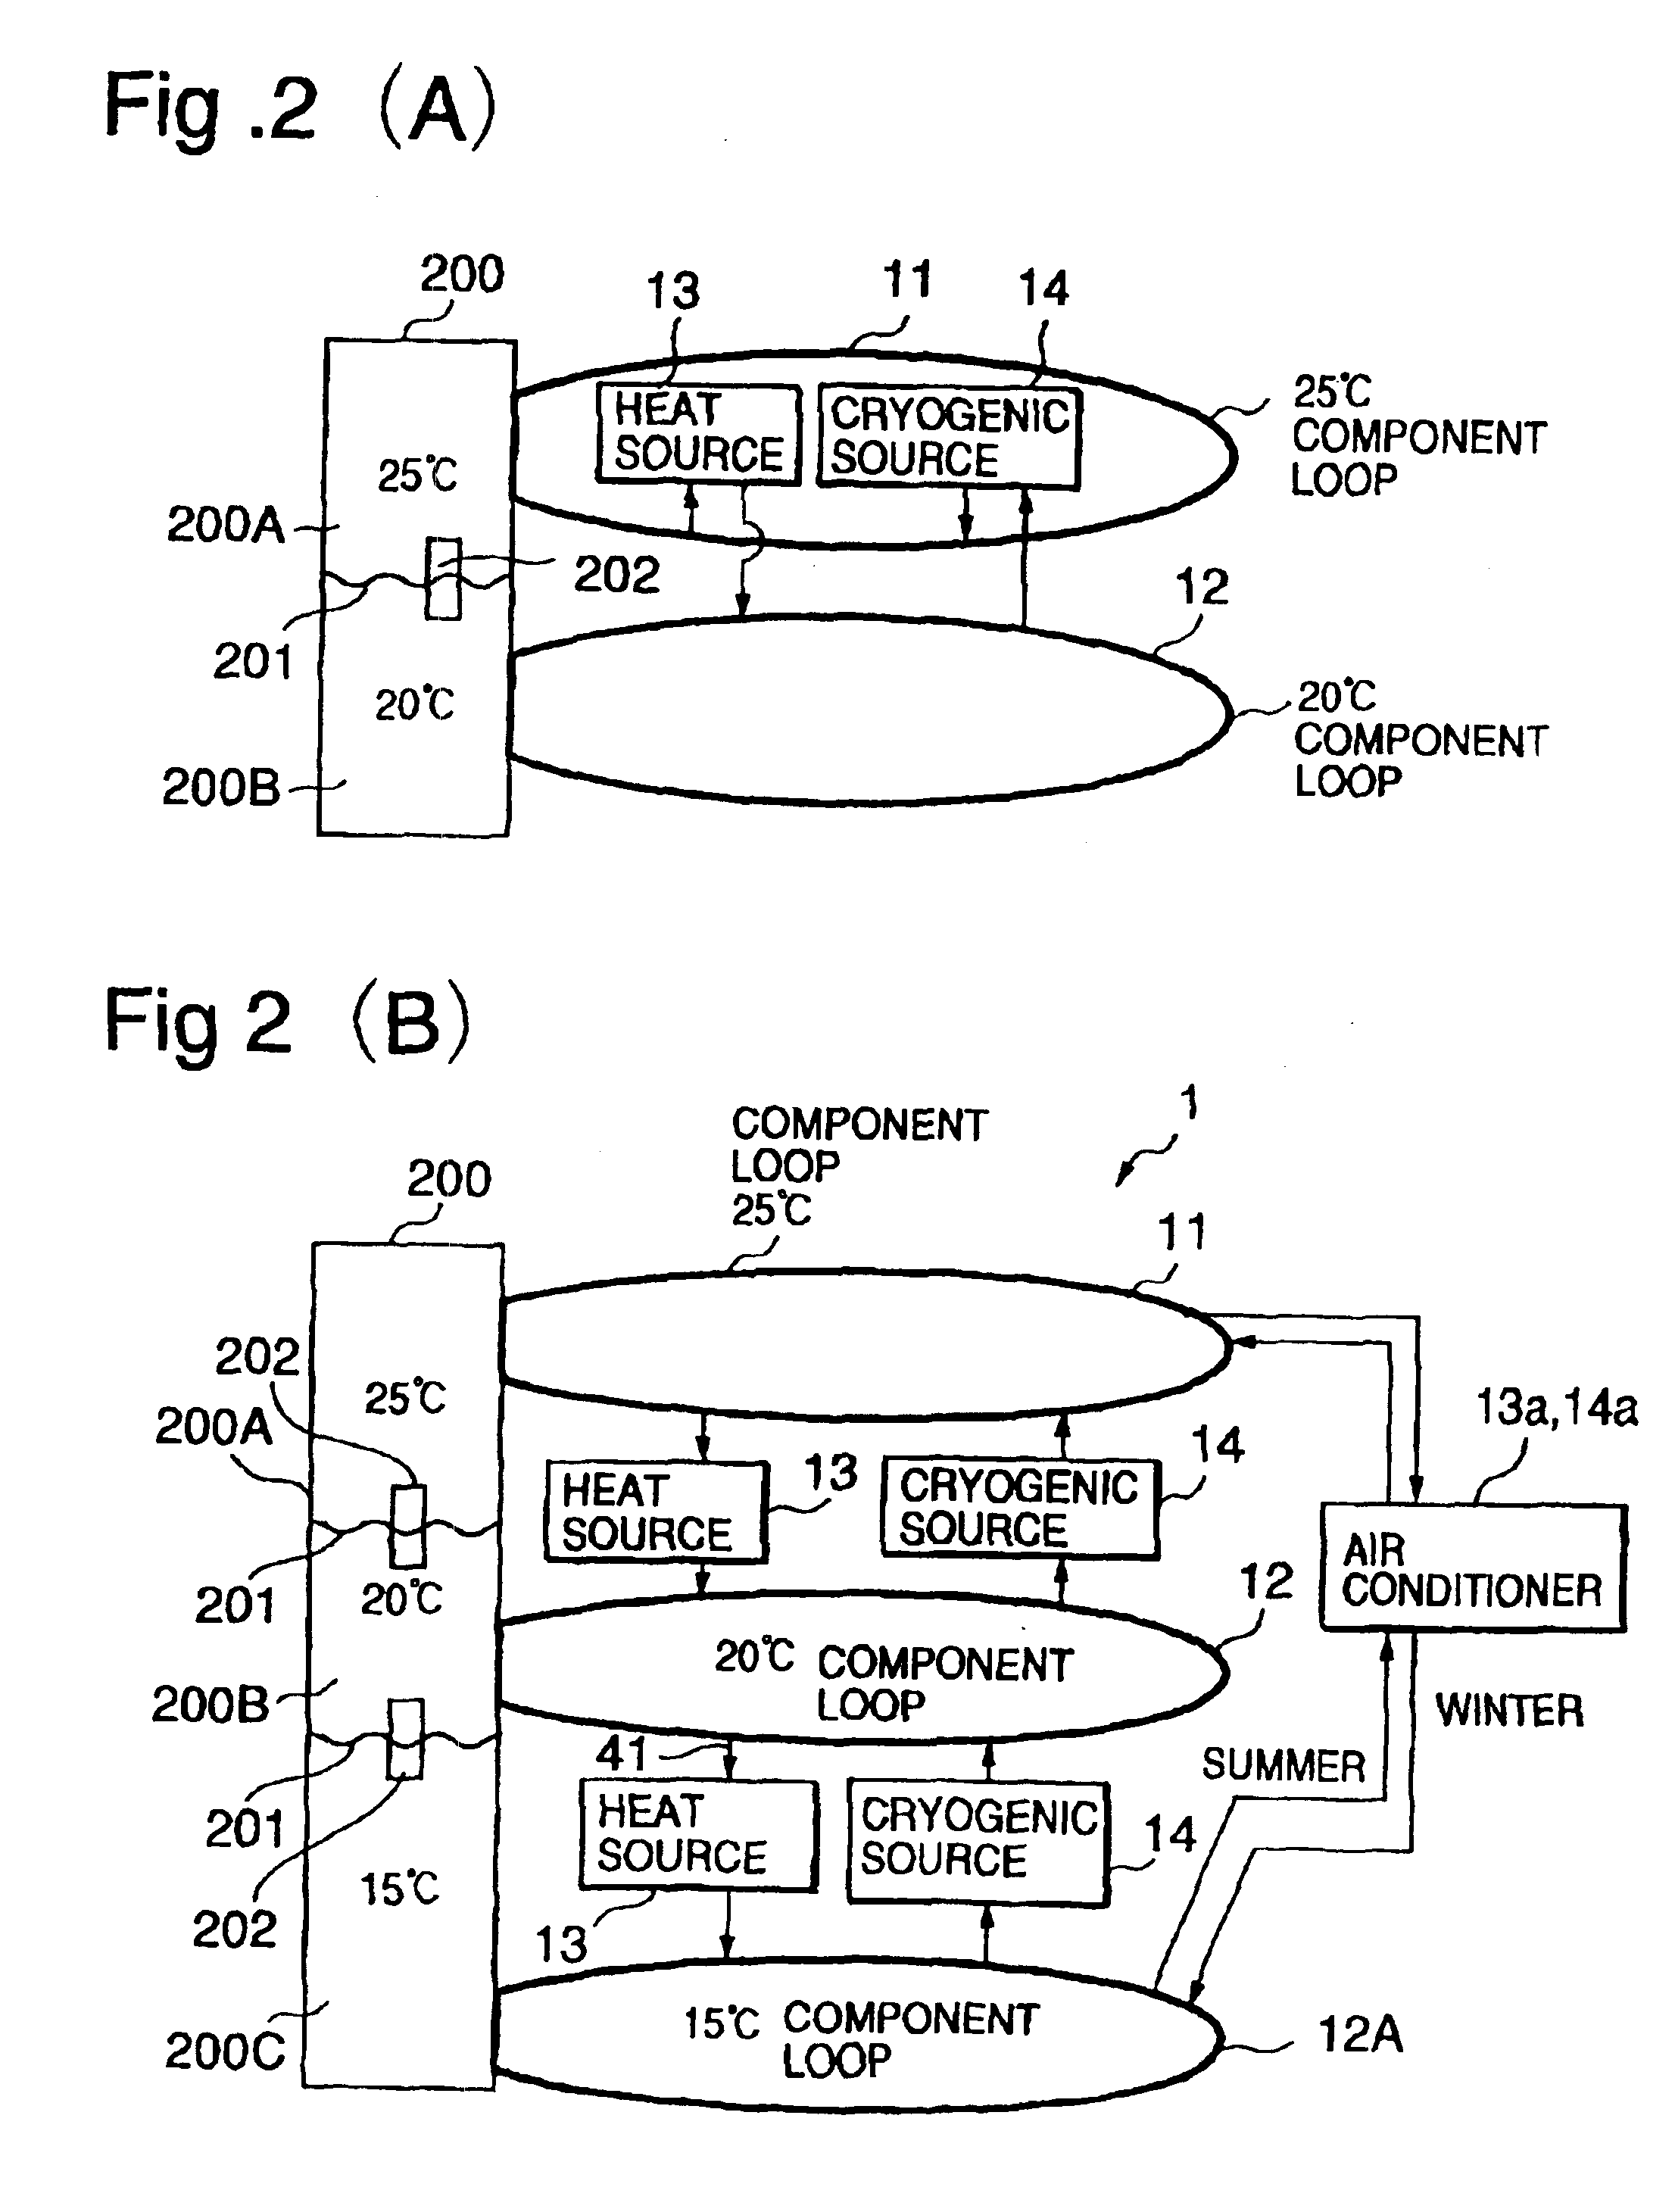 Inter-region thermal complementary system by distributed cryogenic and thermal devices